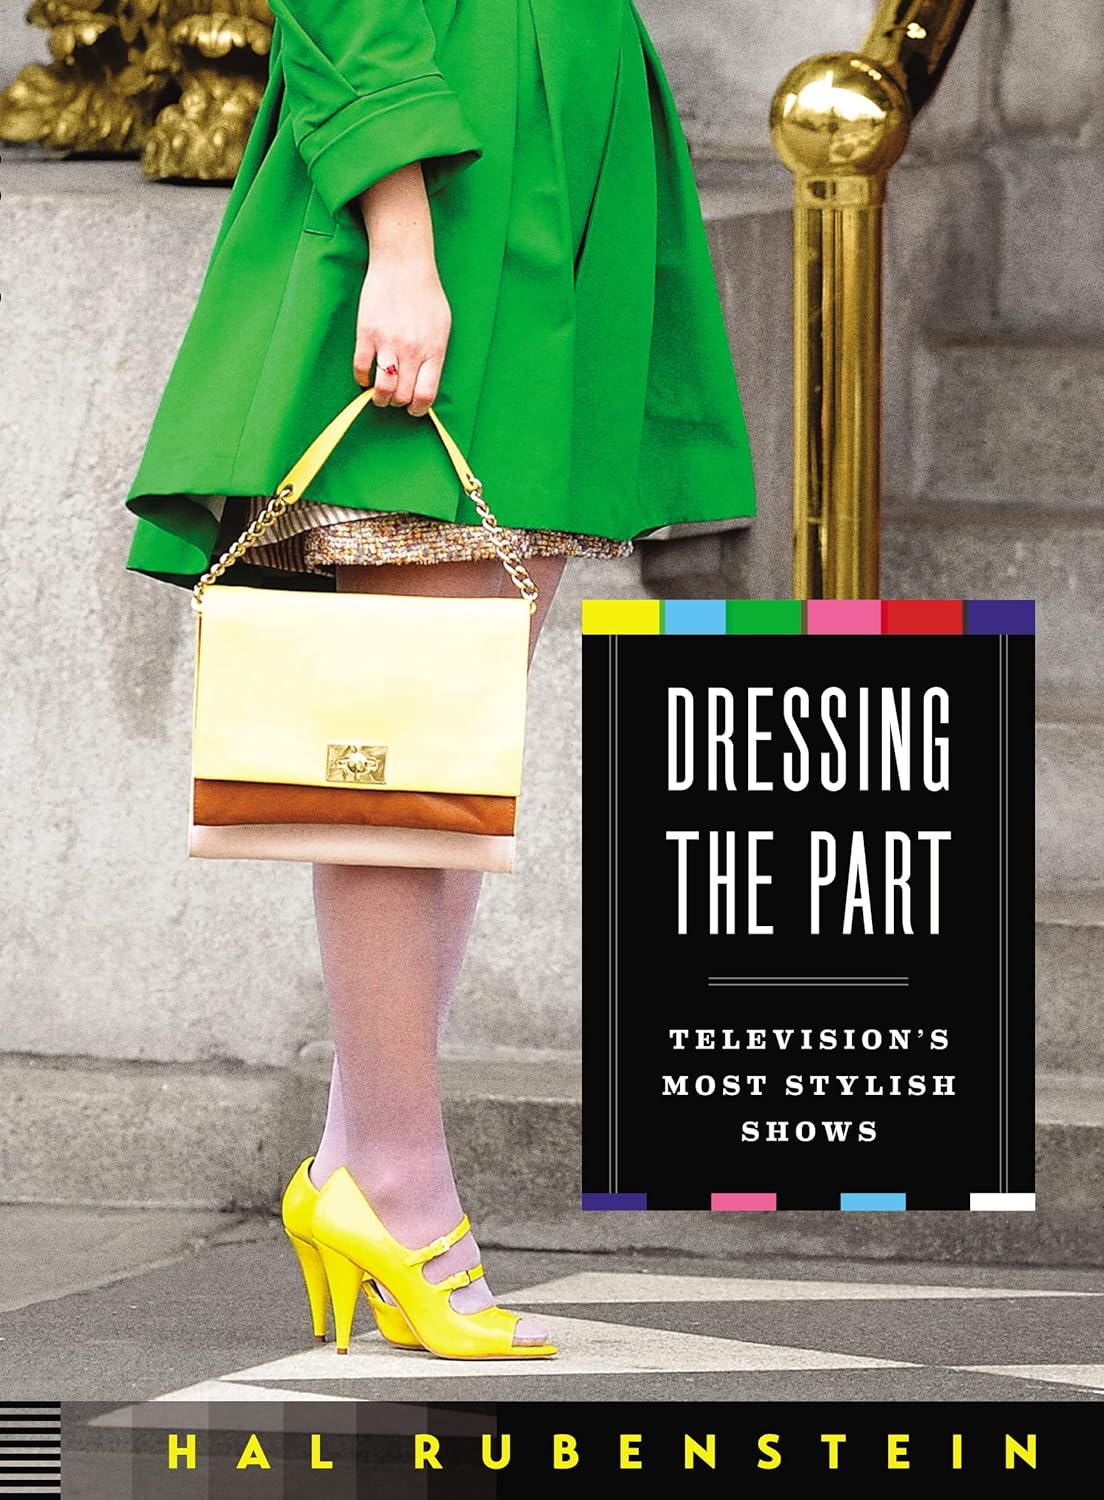 A book cover depicting a woman in 1950s-era clothing. She is wearing yellow heels and a green raincoat. 